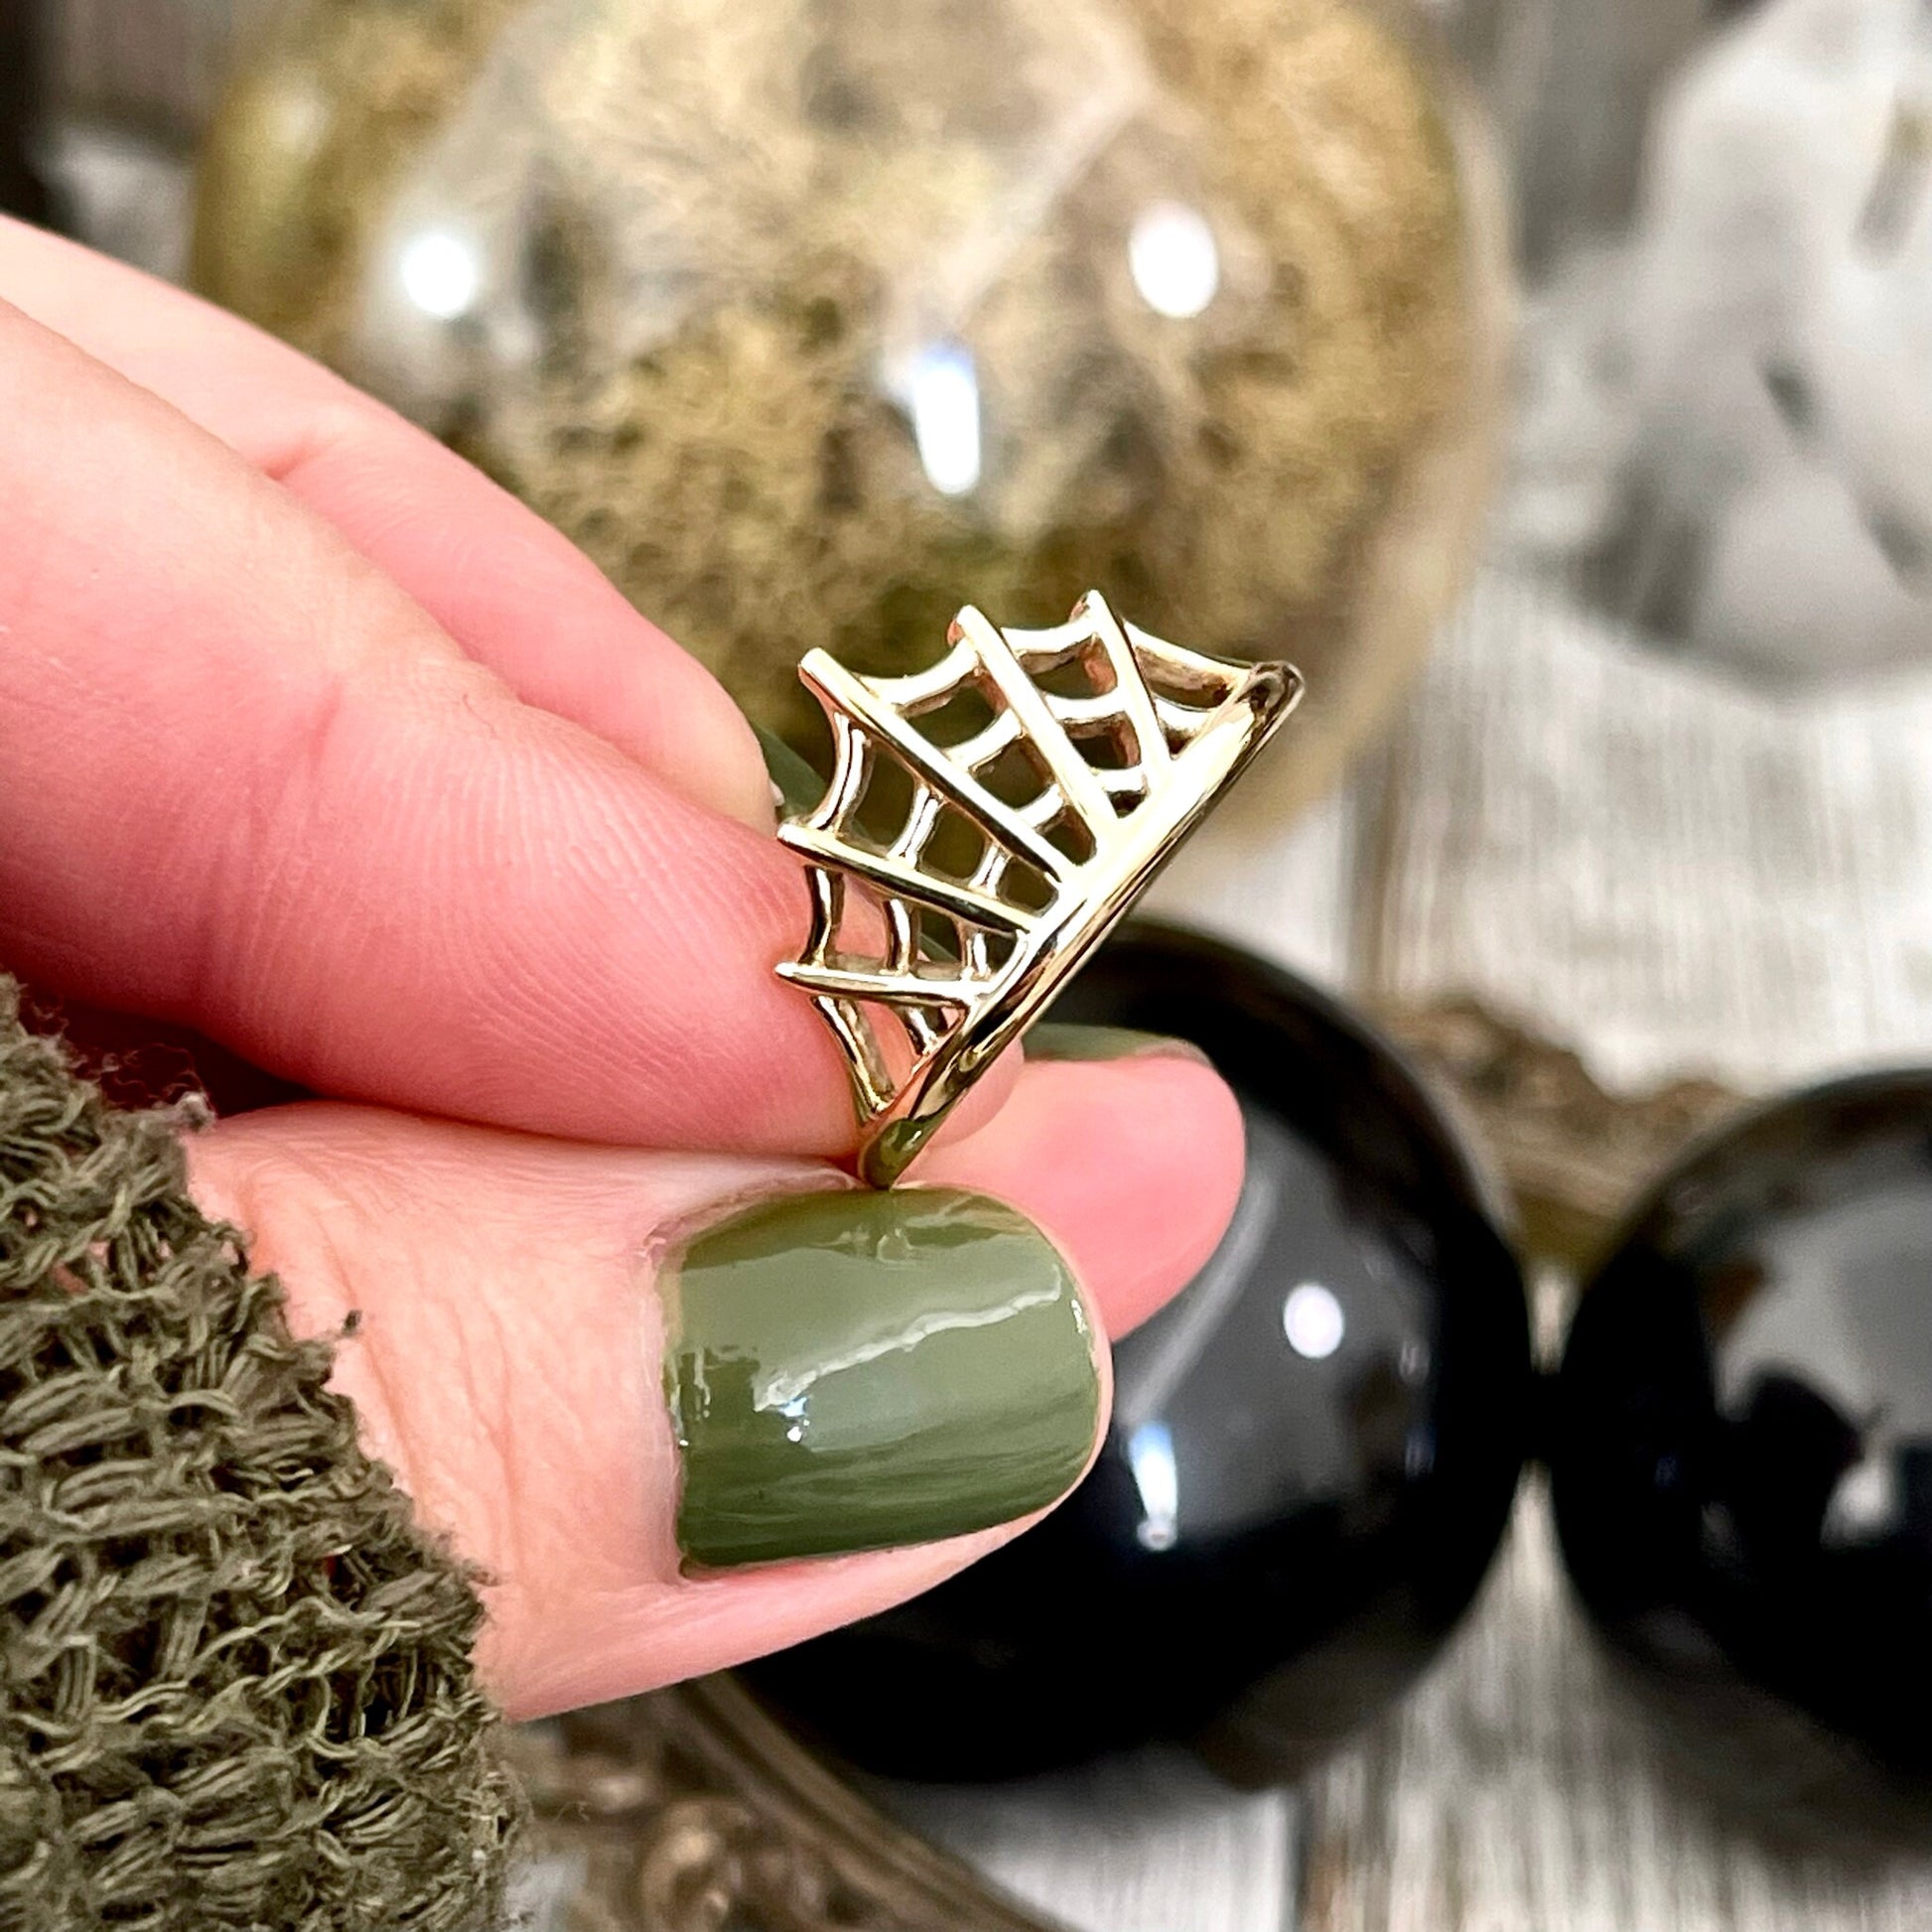 Bohemian Ring, boho jewelry, boho ring, Etsy ID: 1593937354, Festival Jewelry, Goth Jewelry, Gothic Jewelry, gypsy ring, Jewelry, Rings, Size 7 8 9, Spider Web Ring, Statement Rings, TINY TALISMANS, Witch Jewelry, Witchy Ring